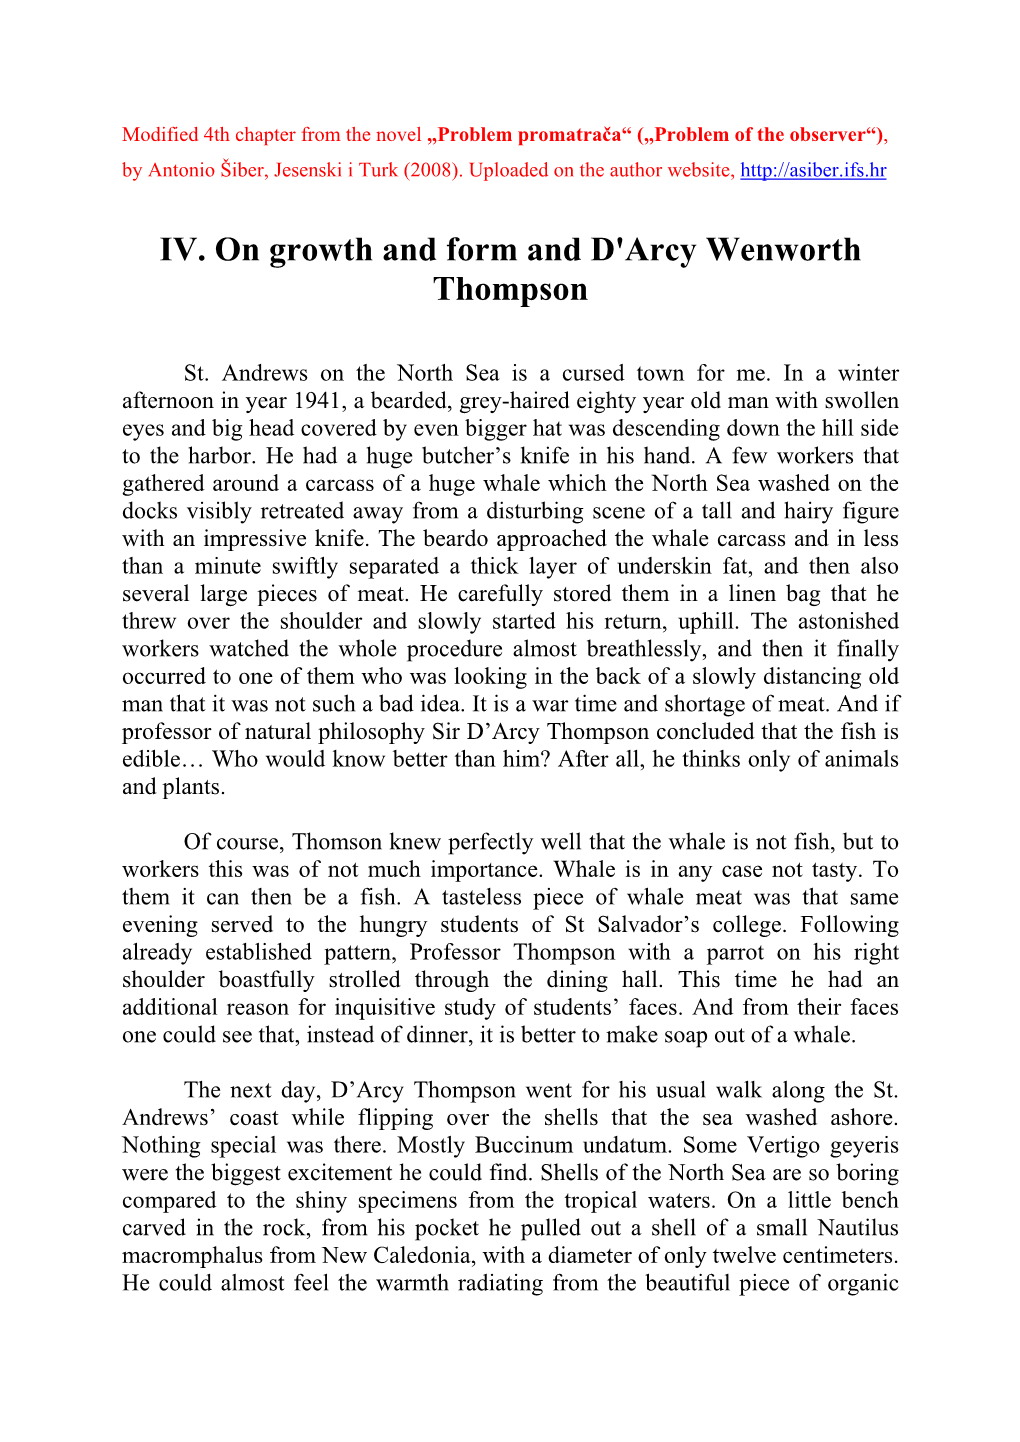 IV. on Growth and Form and D'arcy Wenworth Thompson